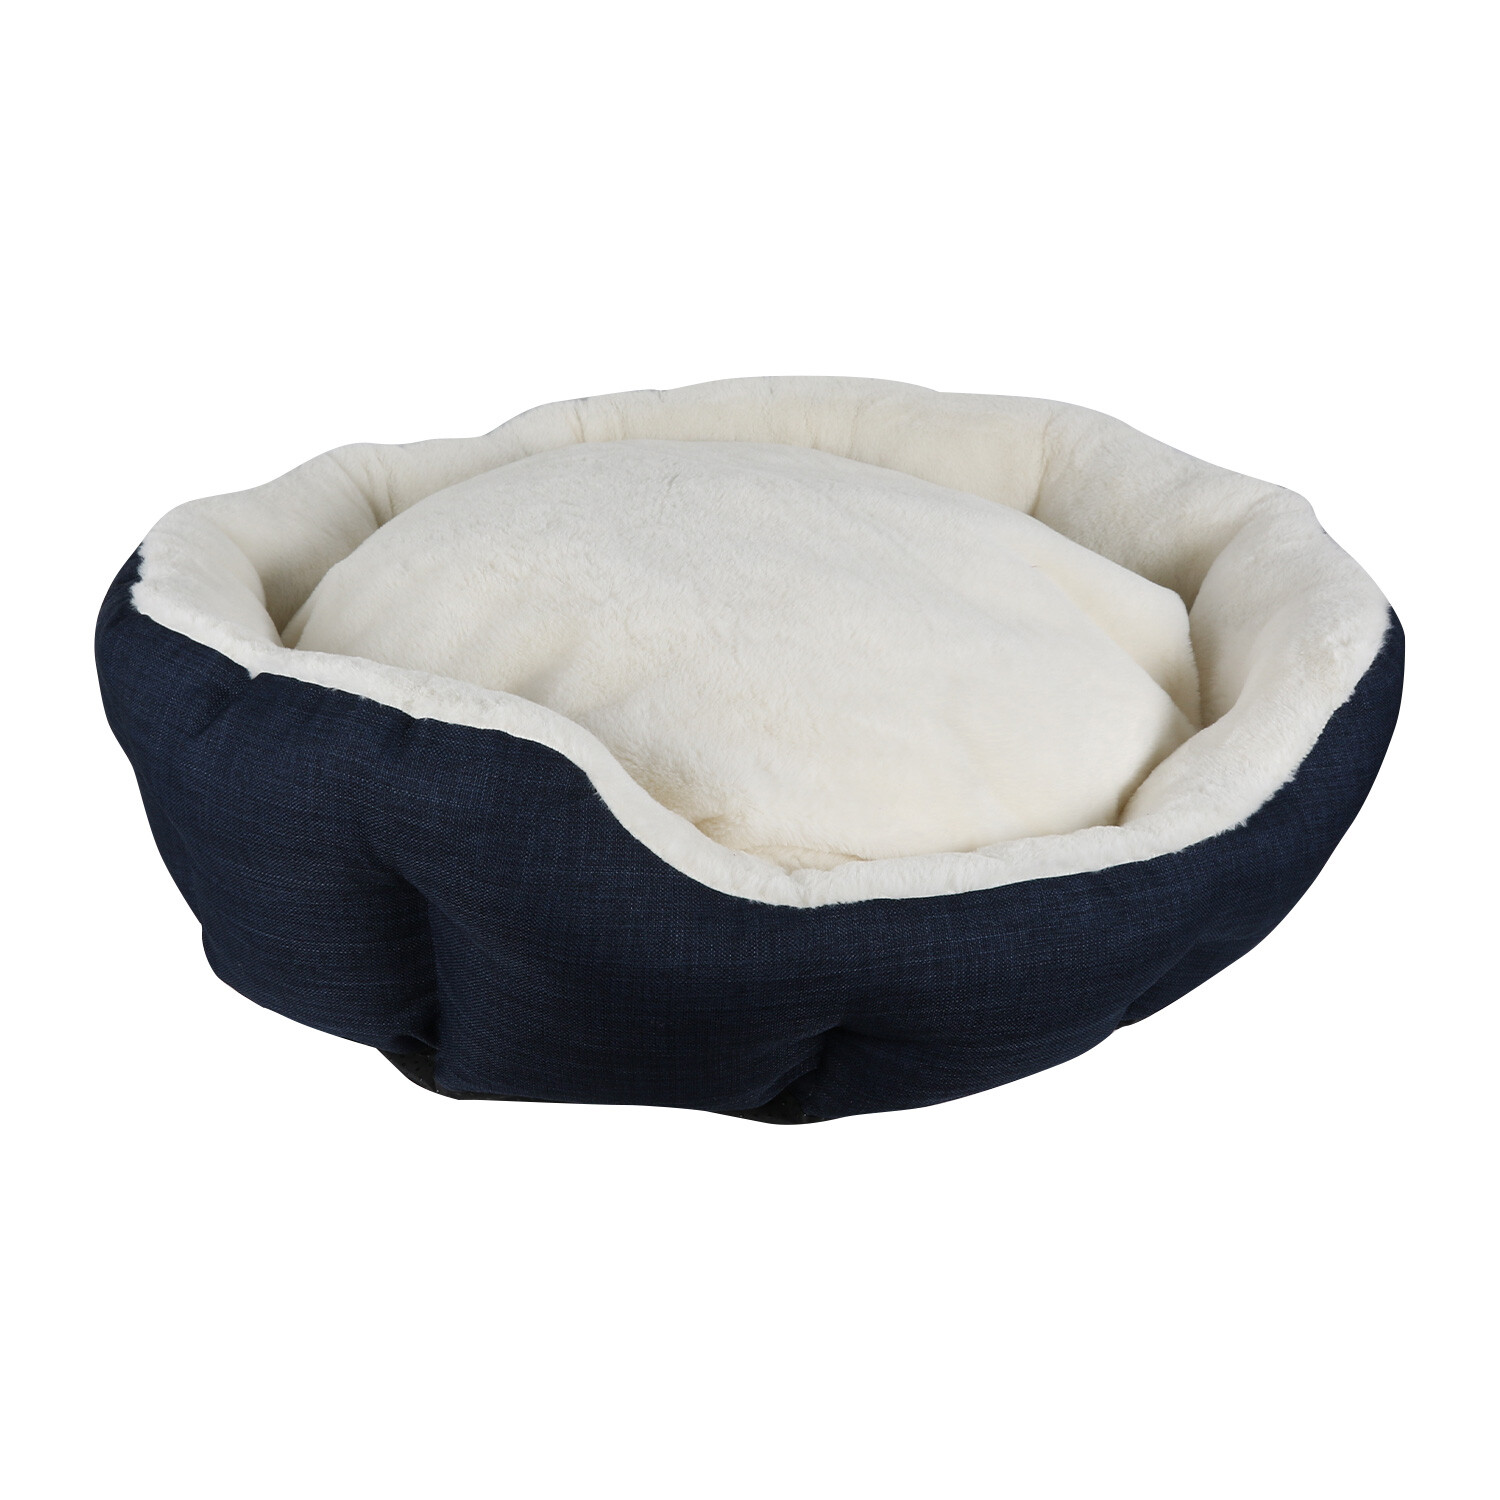 Clever Paws Medium Navy Soft Dog Bed Image 2